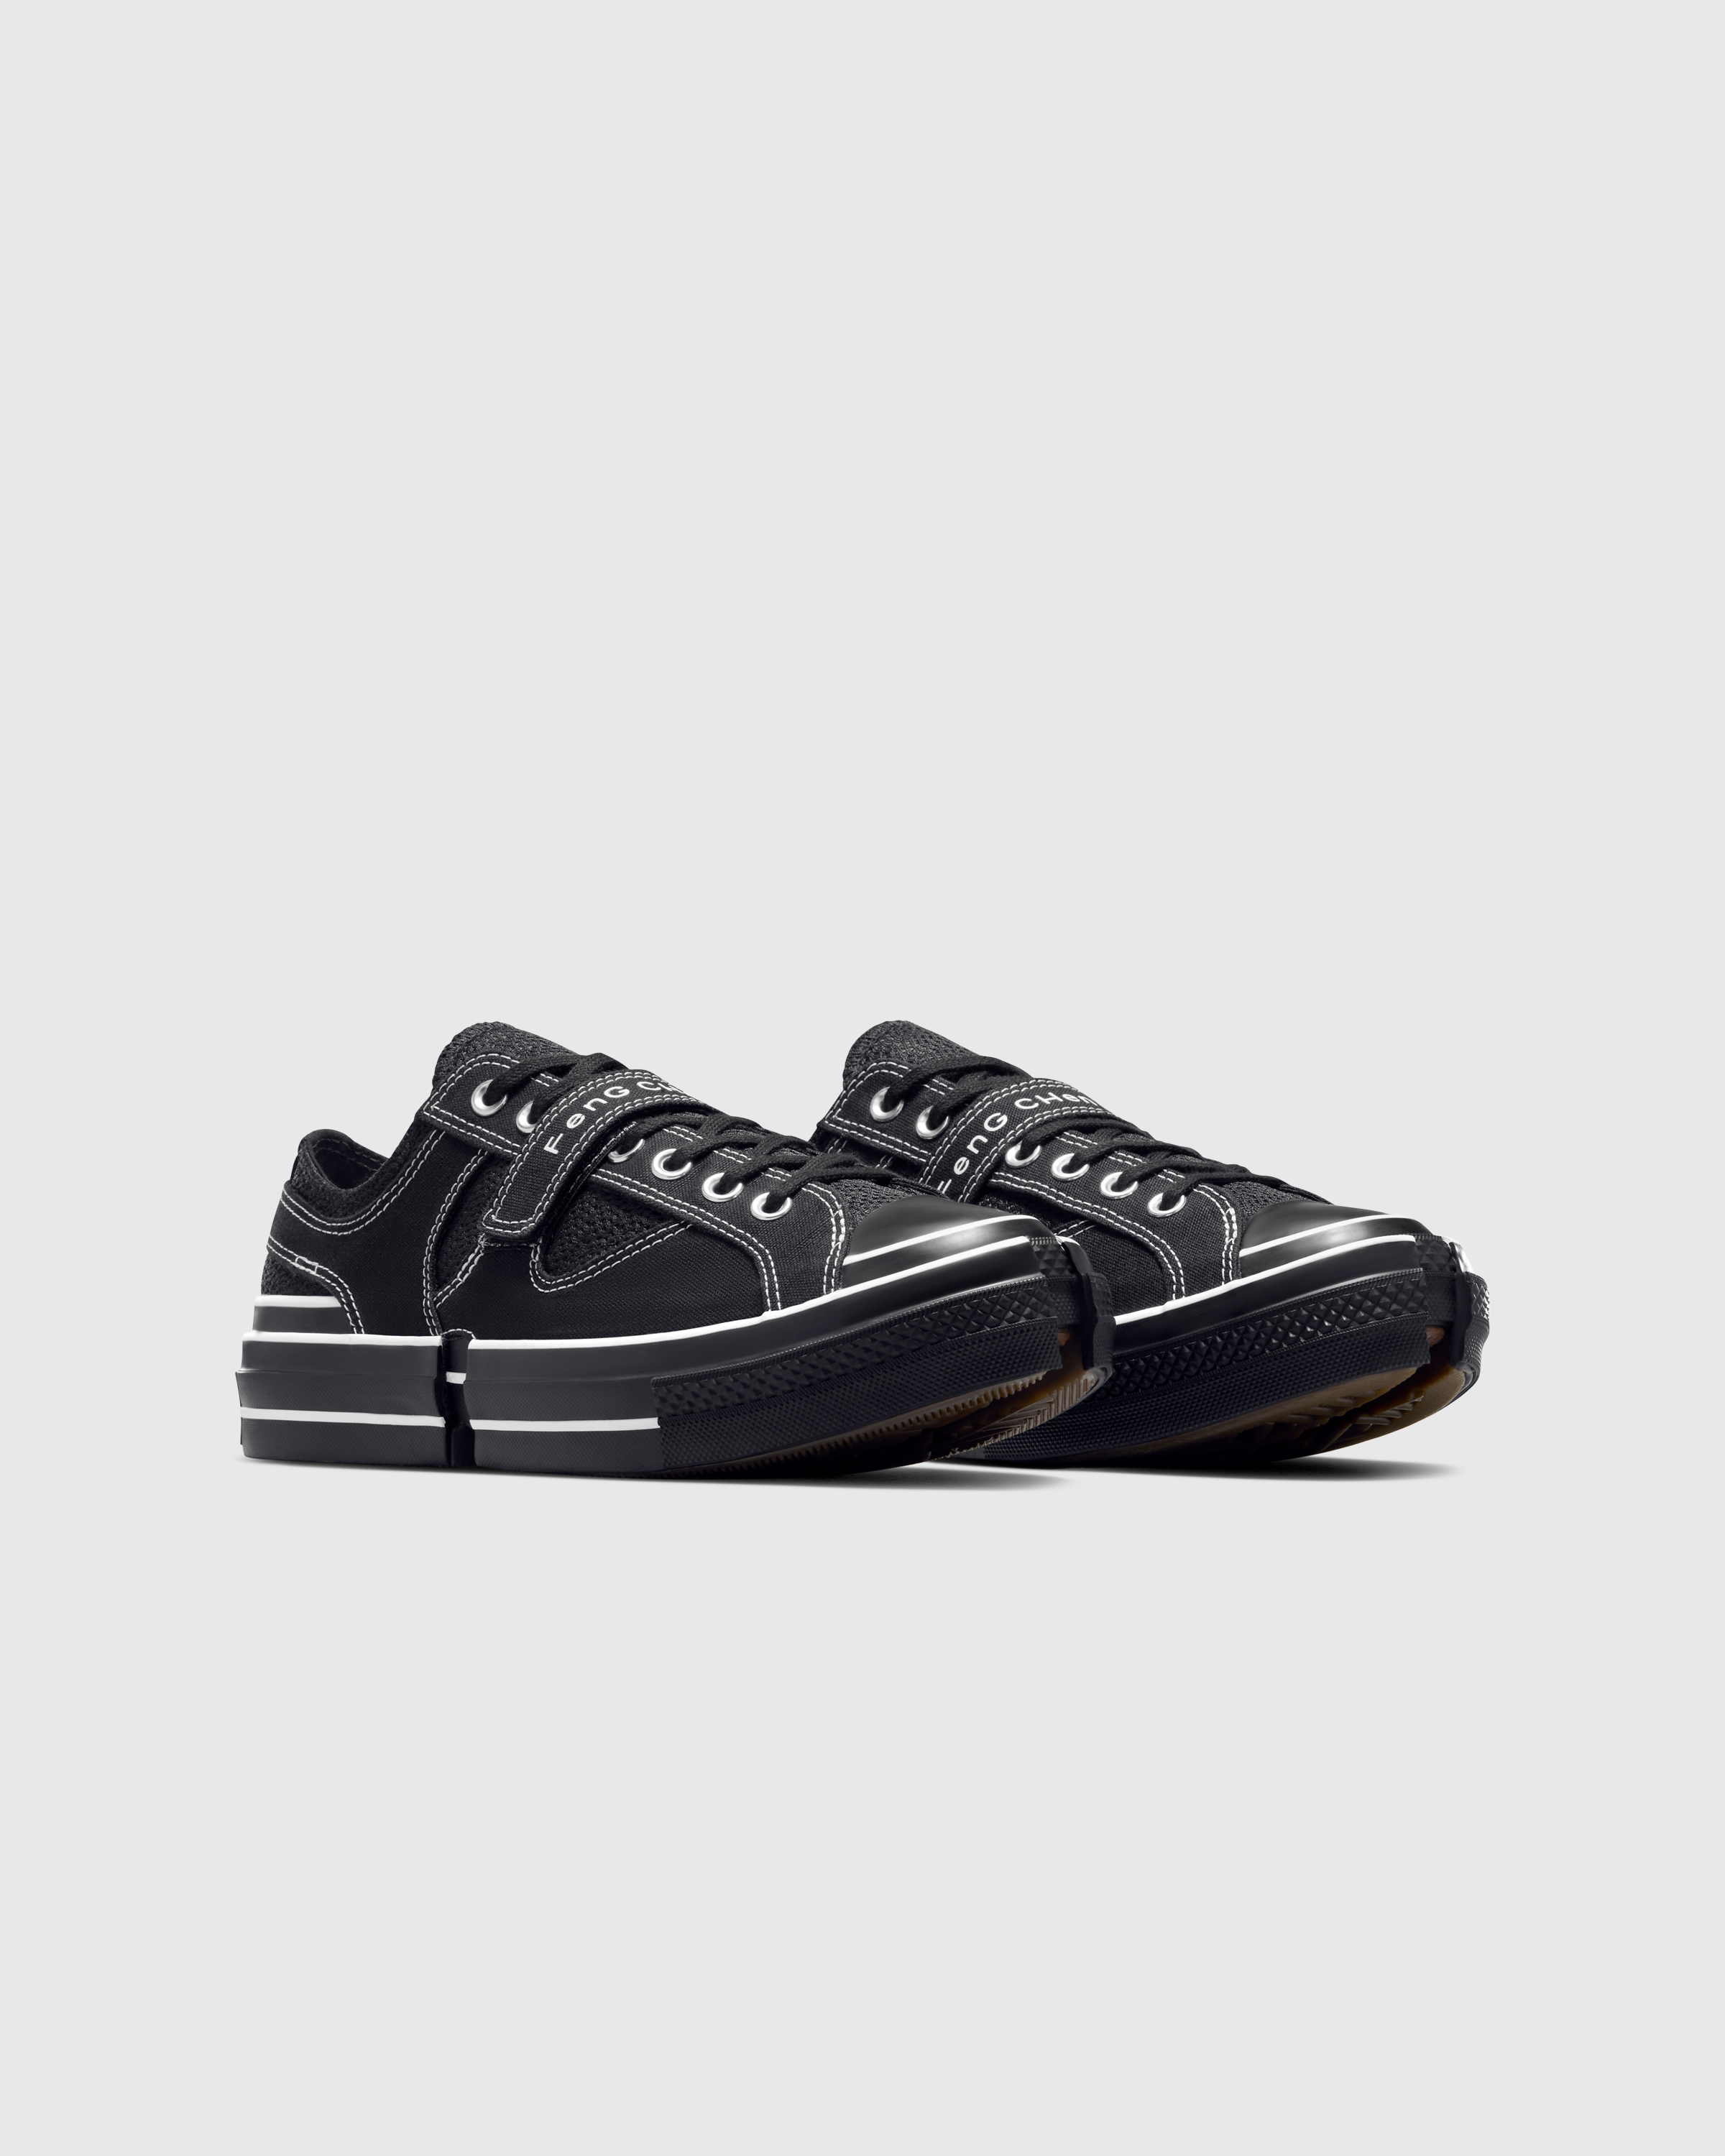 Feng Chen Wang x Converse – 2-in-1 Chuck 70 Black/Egret/Black - Low Top Sneakers - Black - Image 3